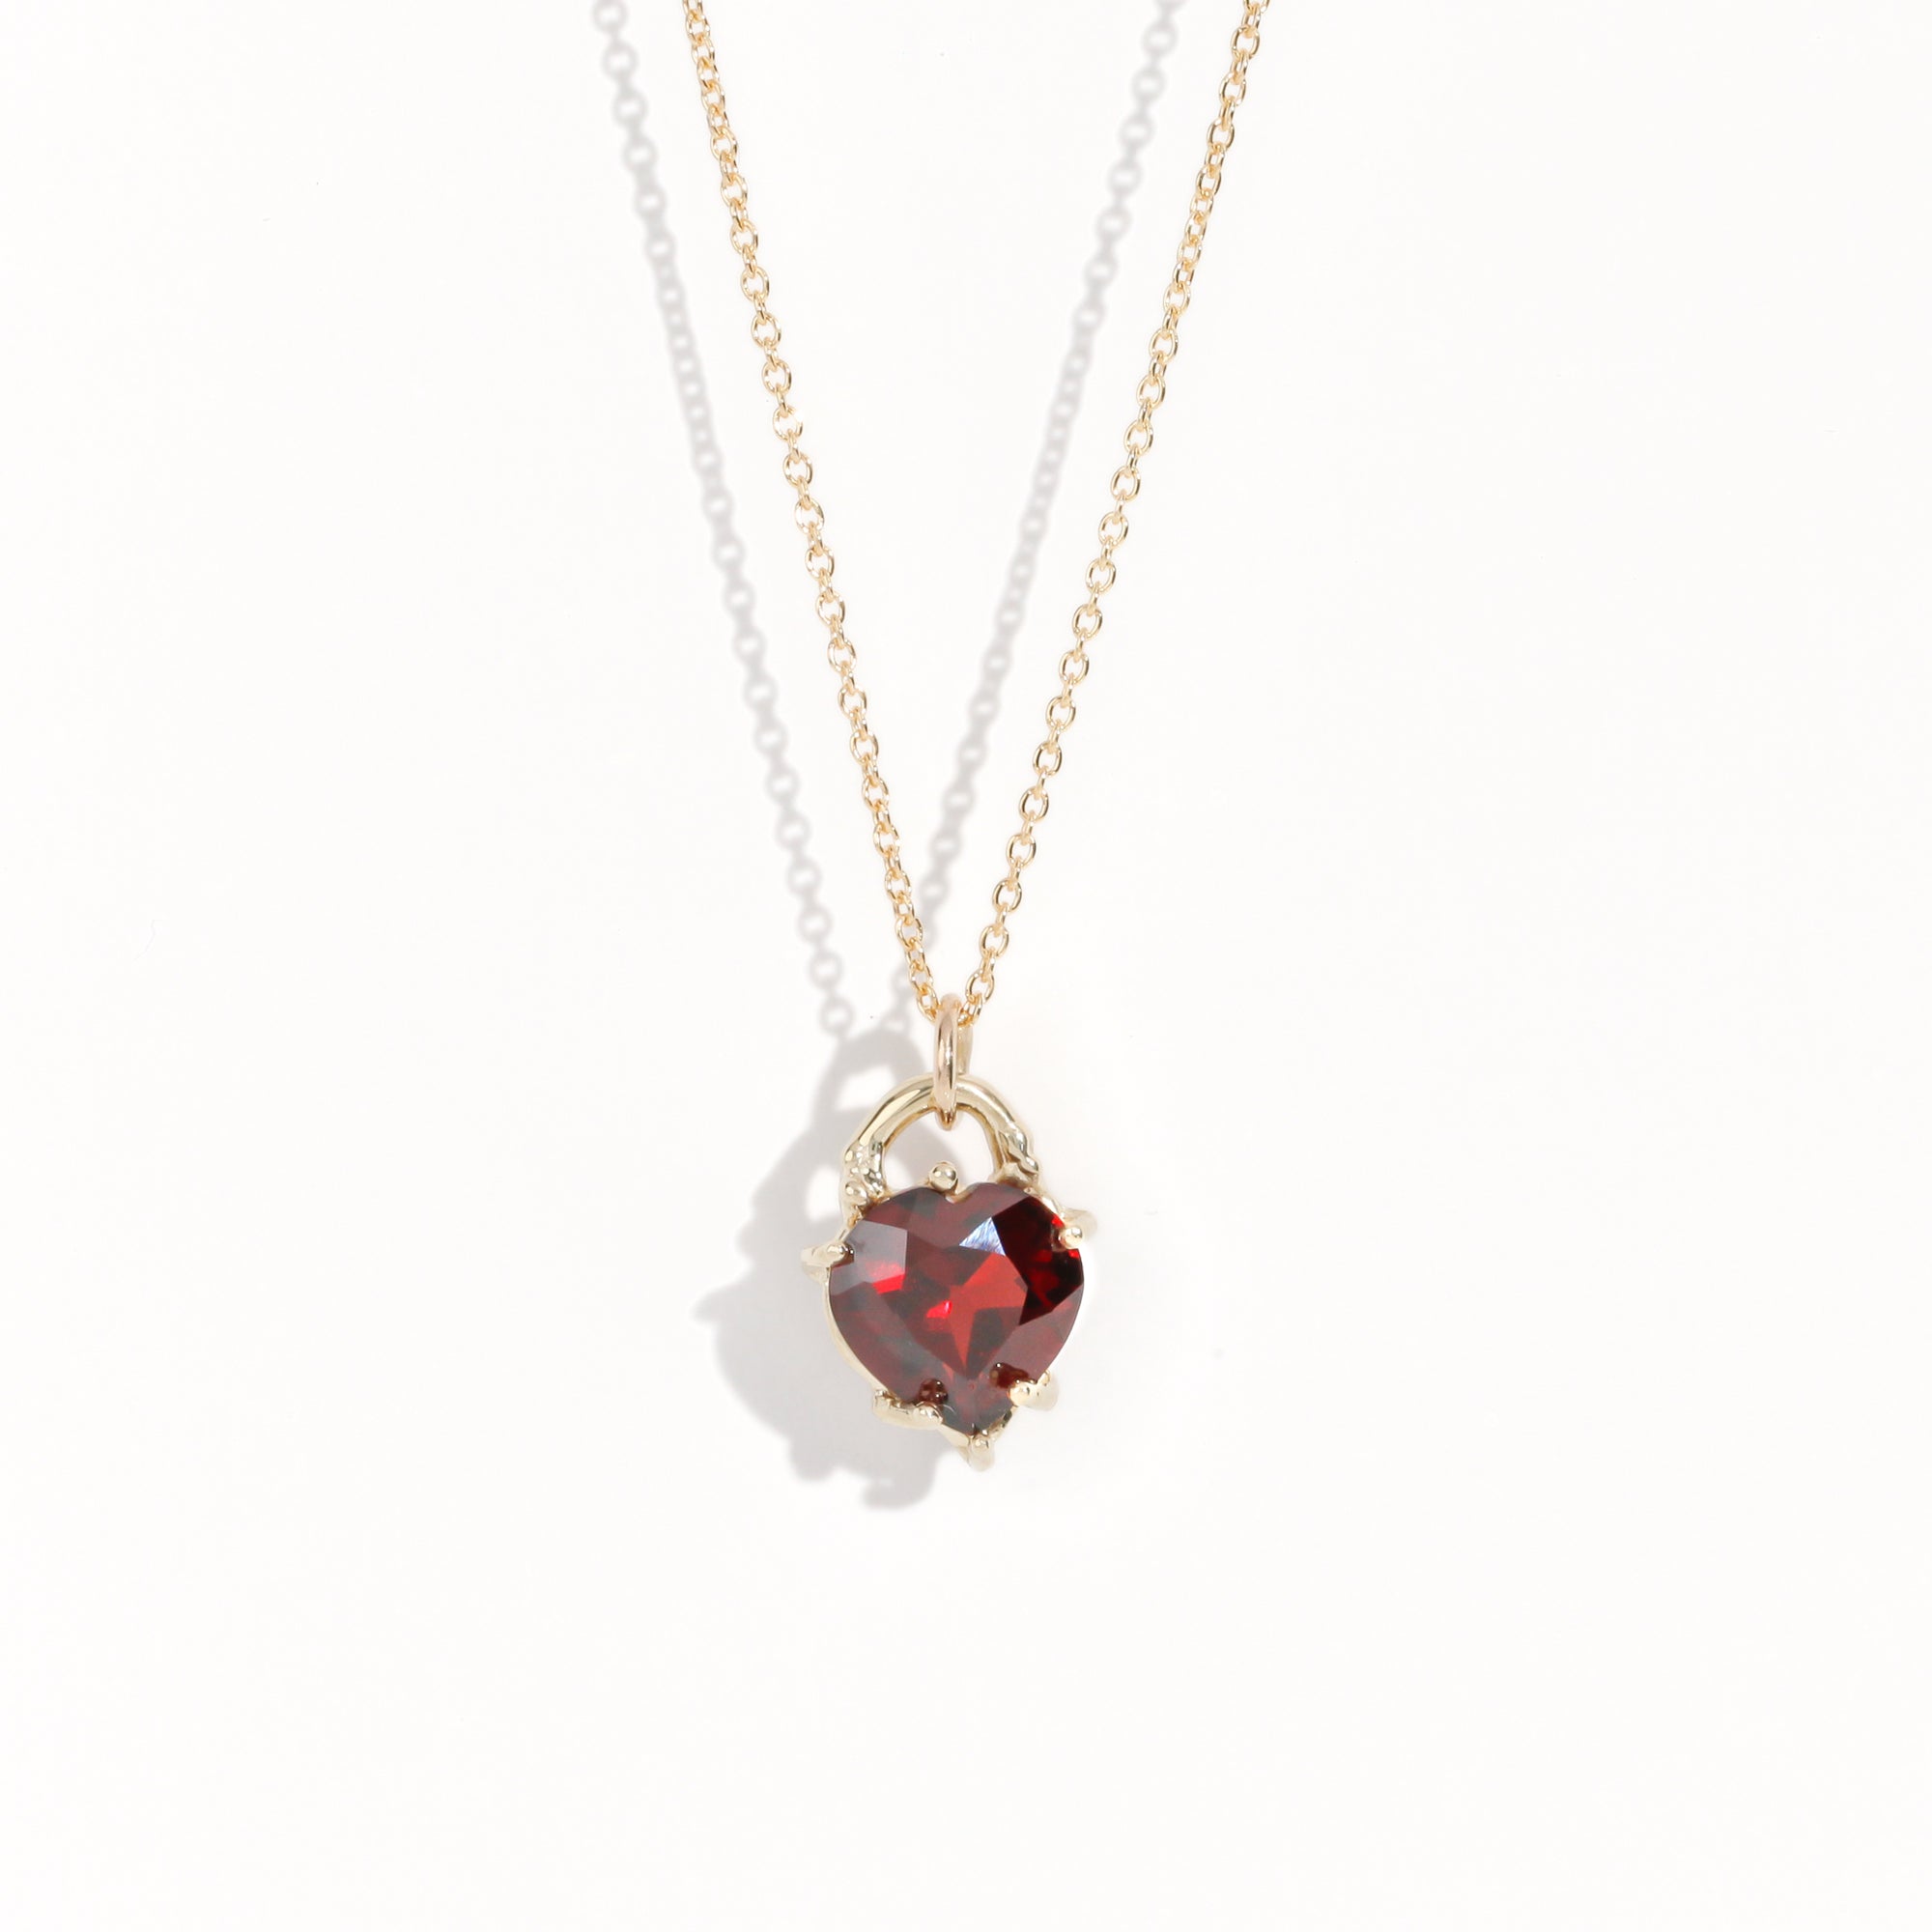 Made in Melbourne, bespoke 9ct yellow gold garnet heart pendant necklace on 9ct gold chain.